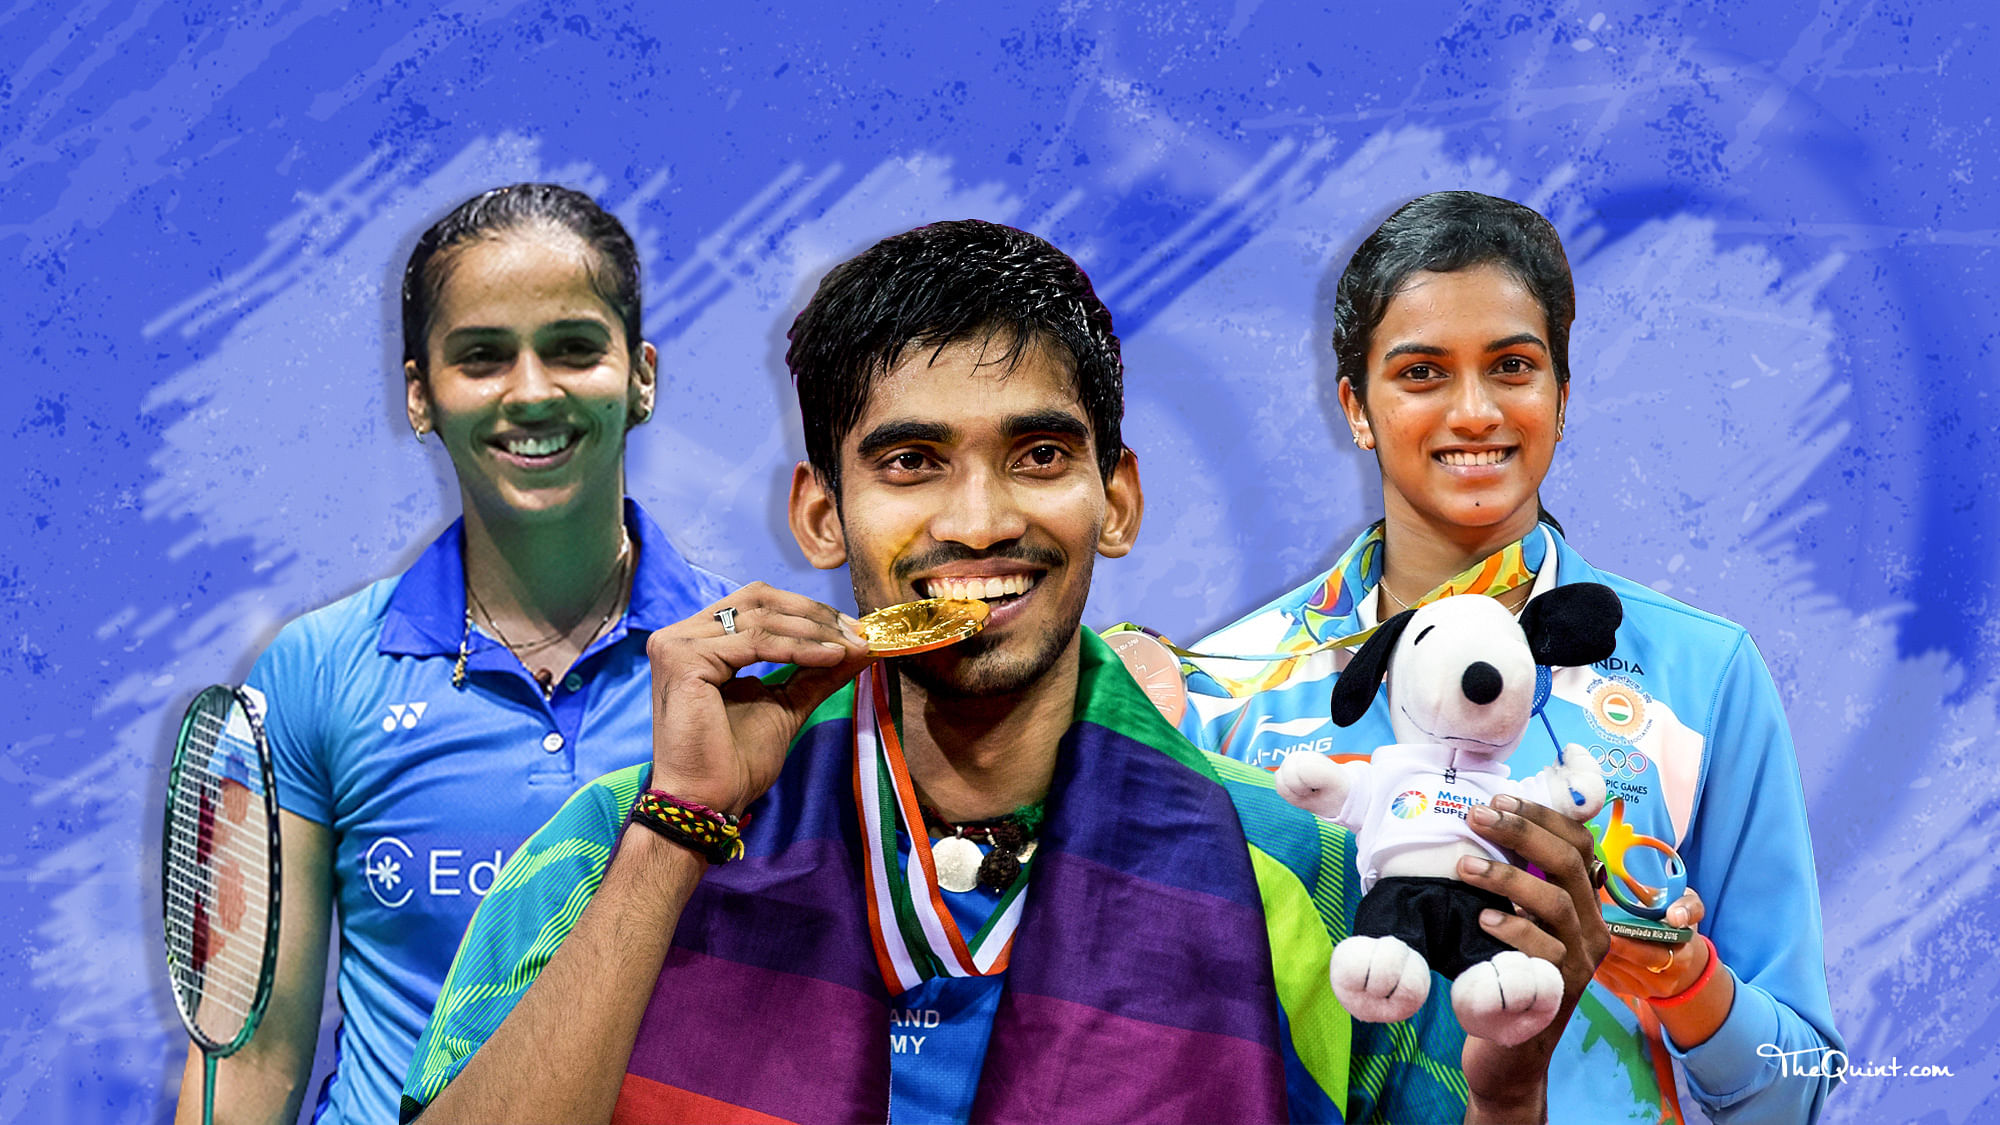 Saina, Srikanth and Sindhu will lead India’s campaign at this week’s Indonesia Masters.